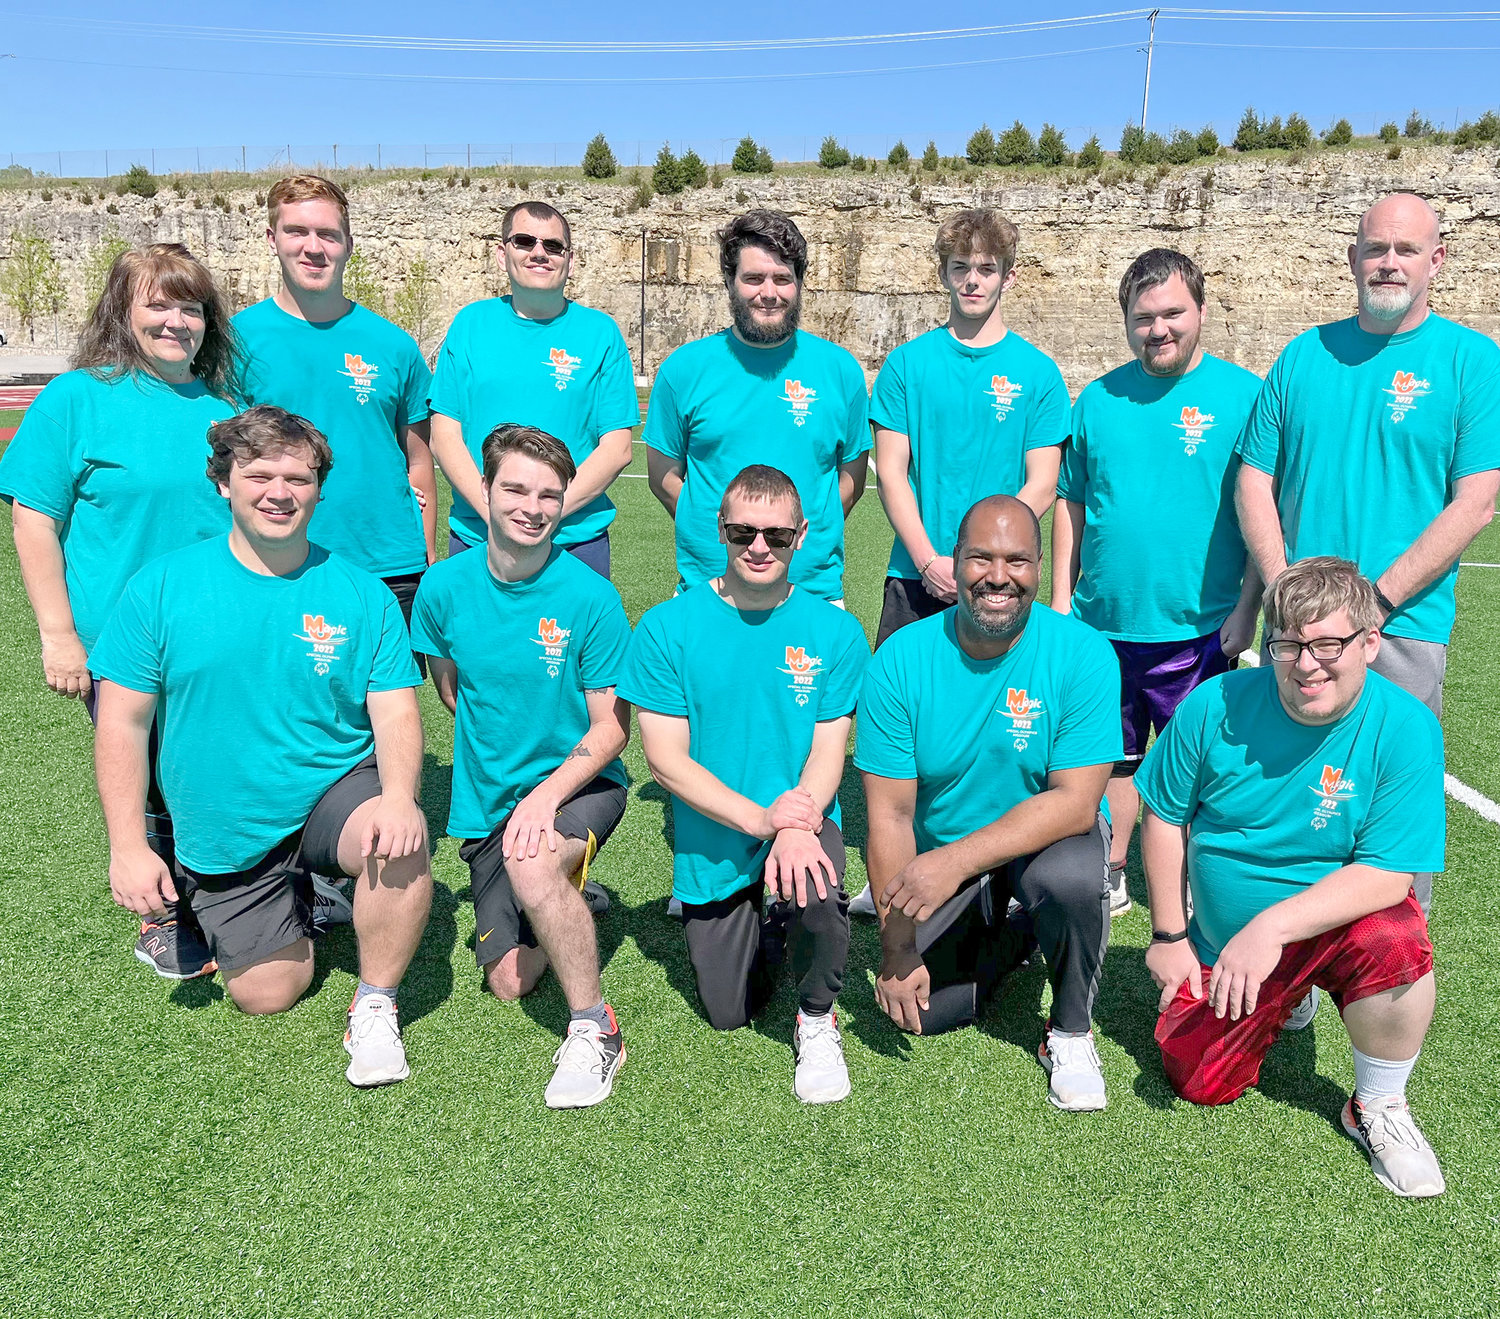 GOING TO NATIONALS — Special Olympics teams from Warren County will be able to compete in the Special Olympics USA Games in Florida this June thanks to community donations. Pictured here is the local boys flag football team. A girls 3-on-3 basketball team will also compete.